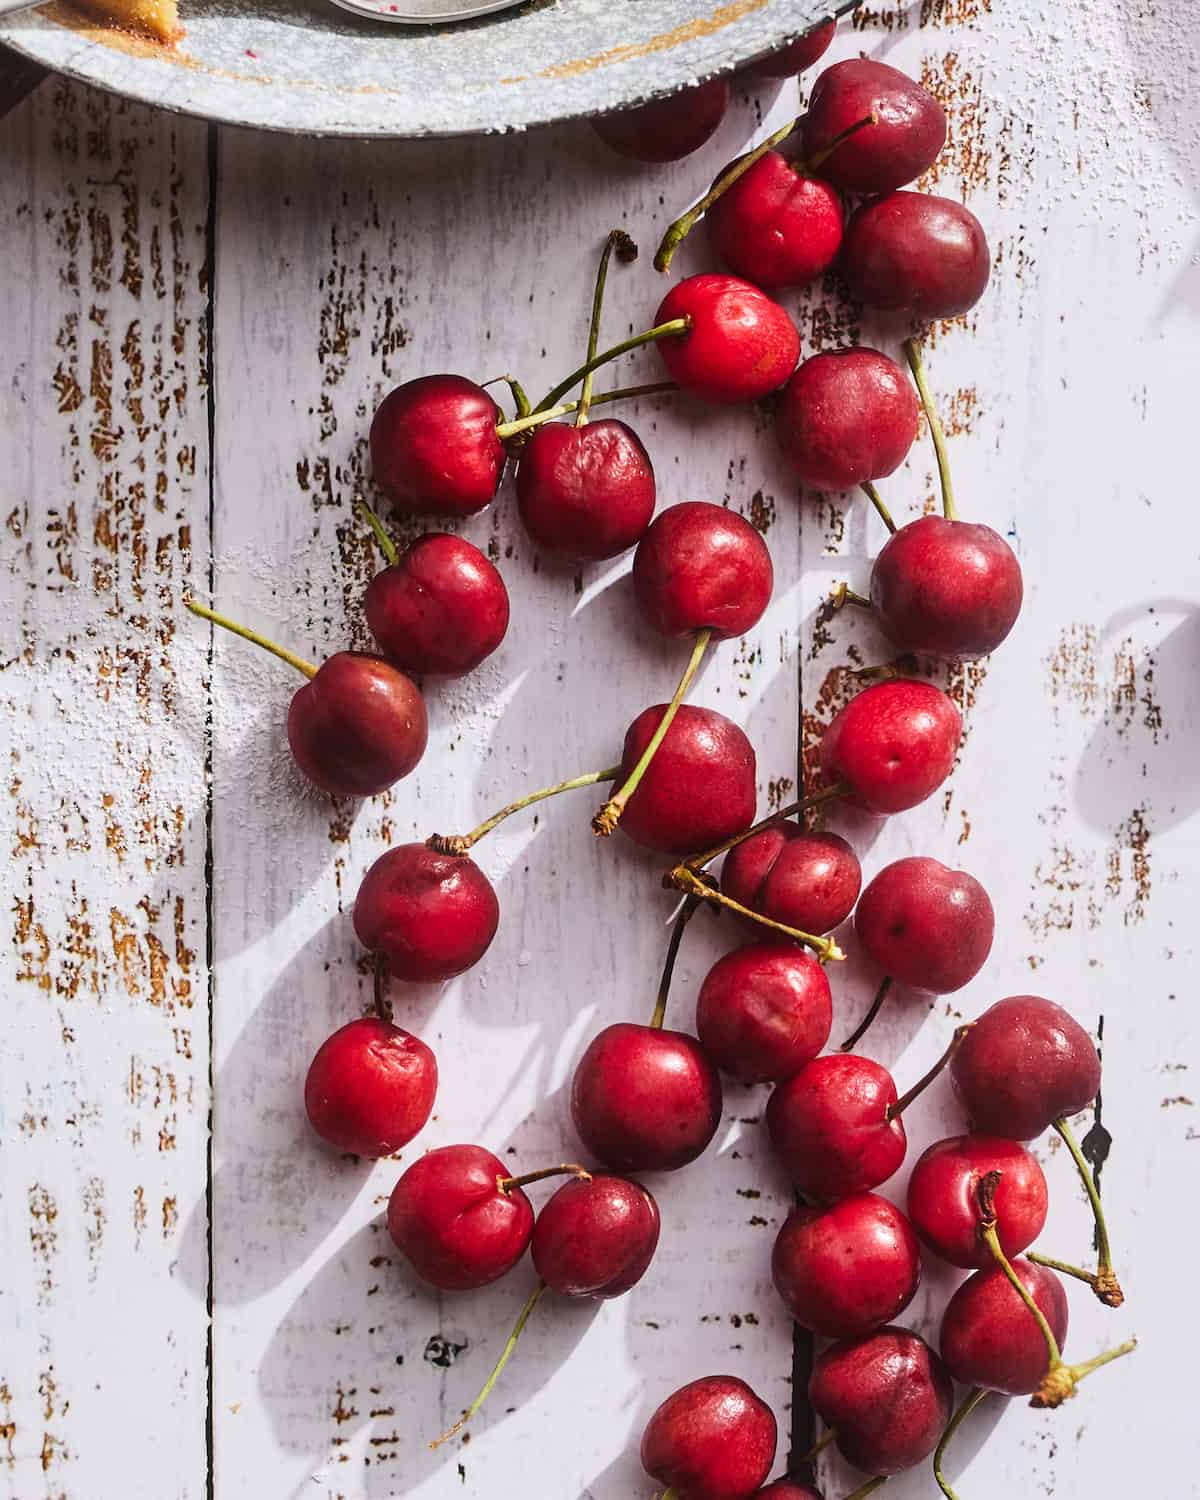 Whole red cherries with stems scattered on a white washed wooden table